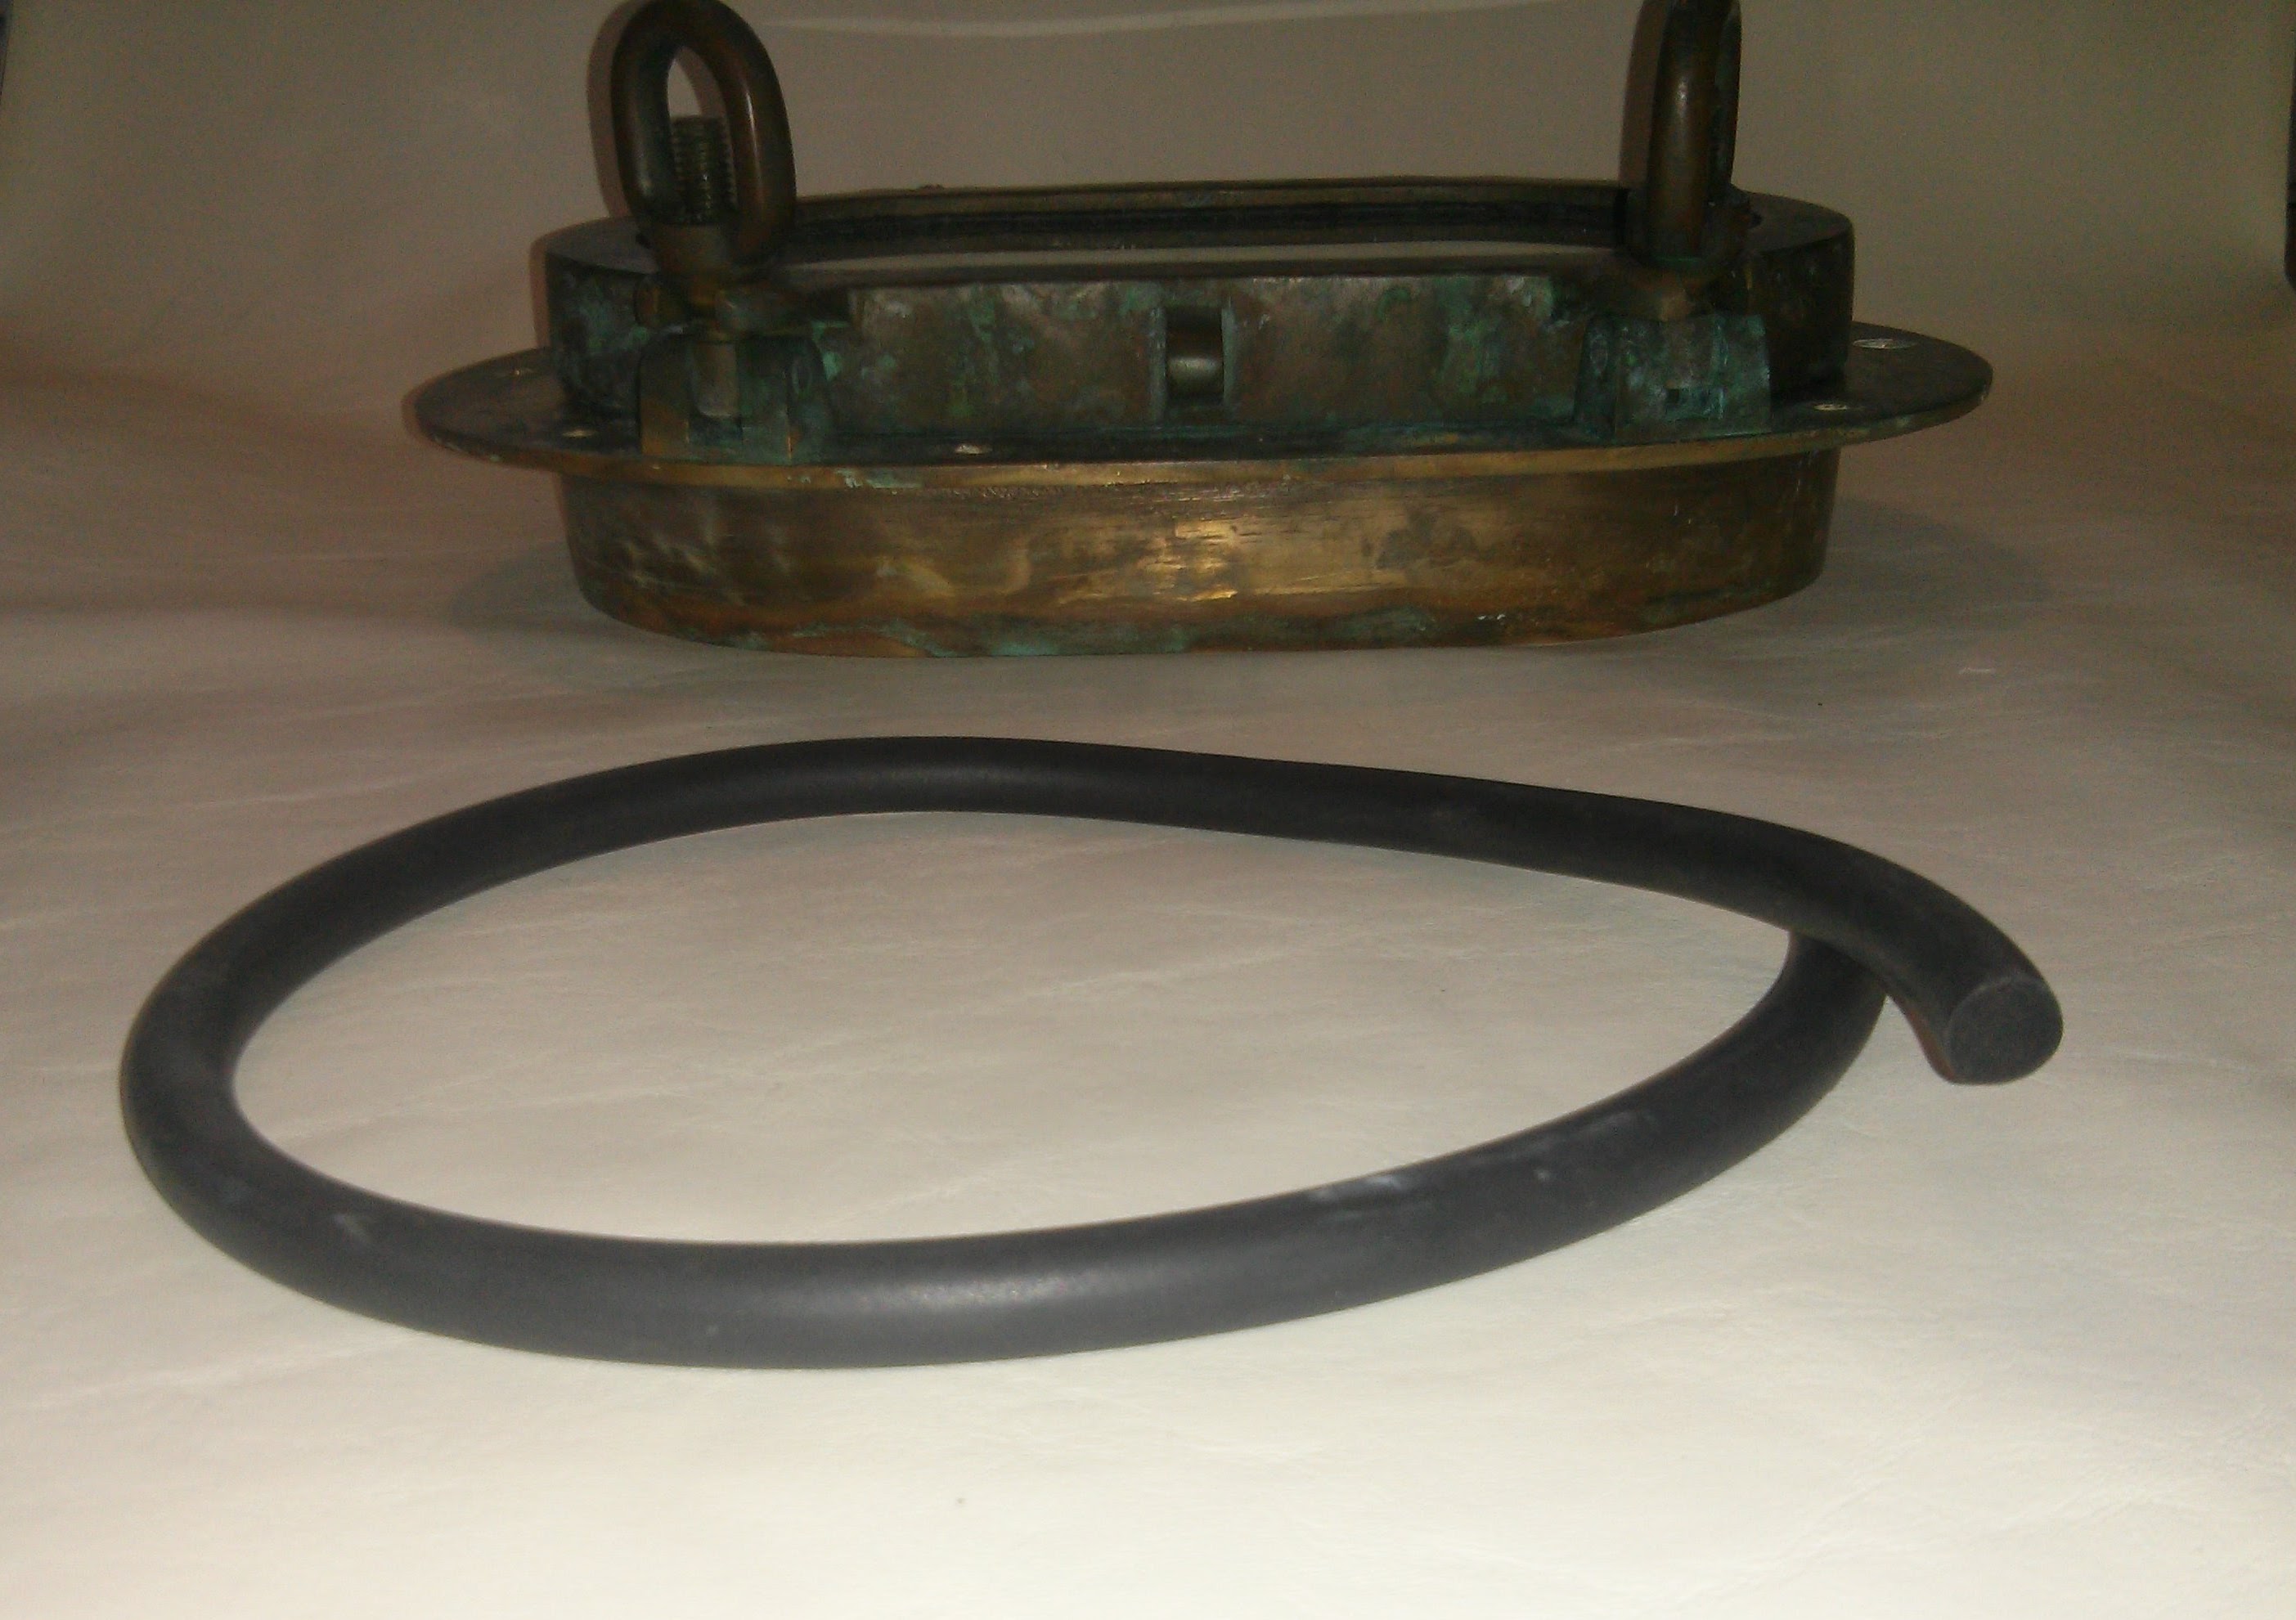 SOLD - New 1/2" round gasket material with port in background